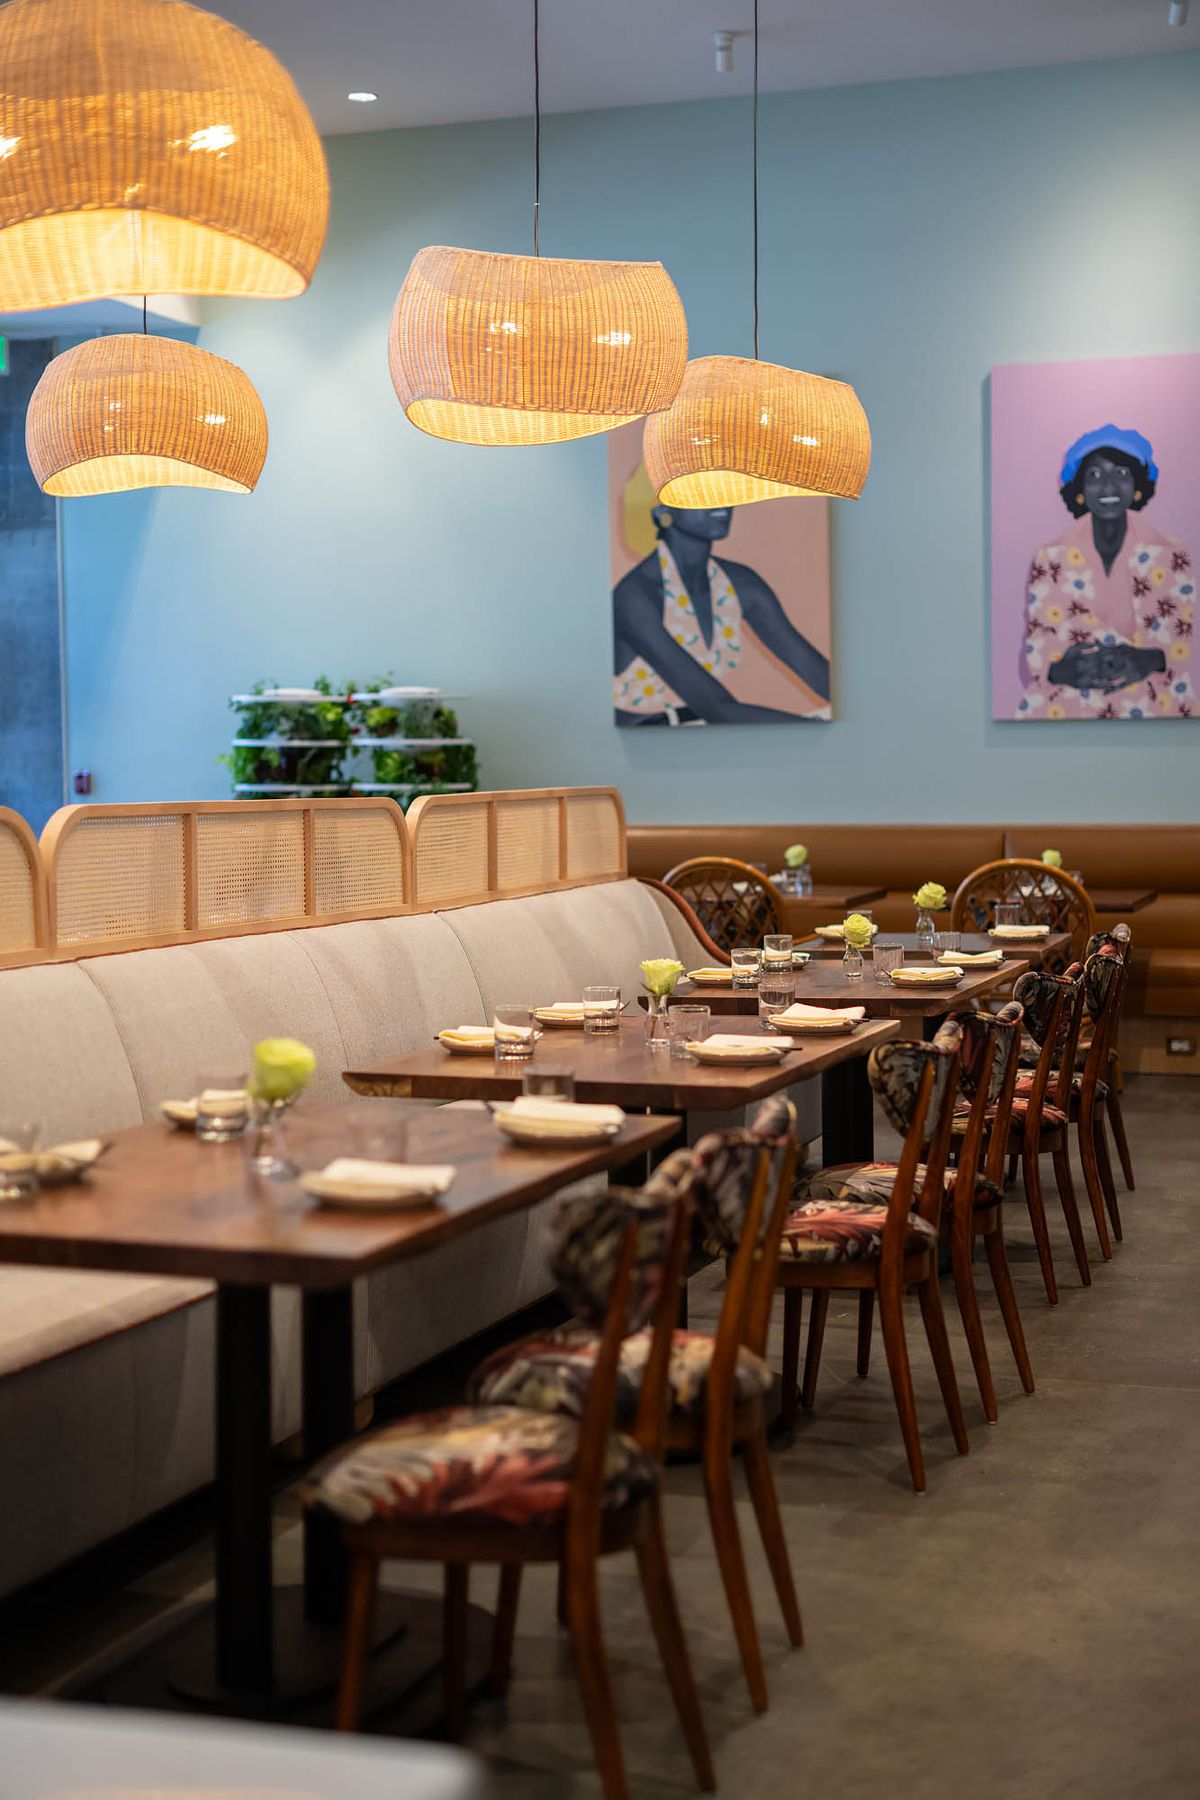 A light tan and grey run of tables and chairs at a new restaurant in Los Angeles named Joyce.